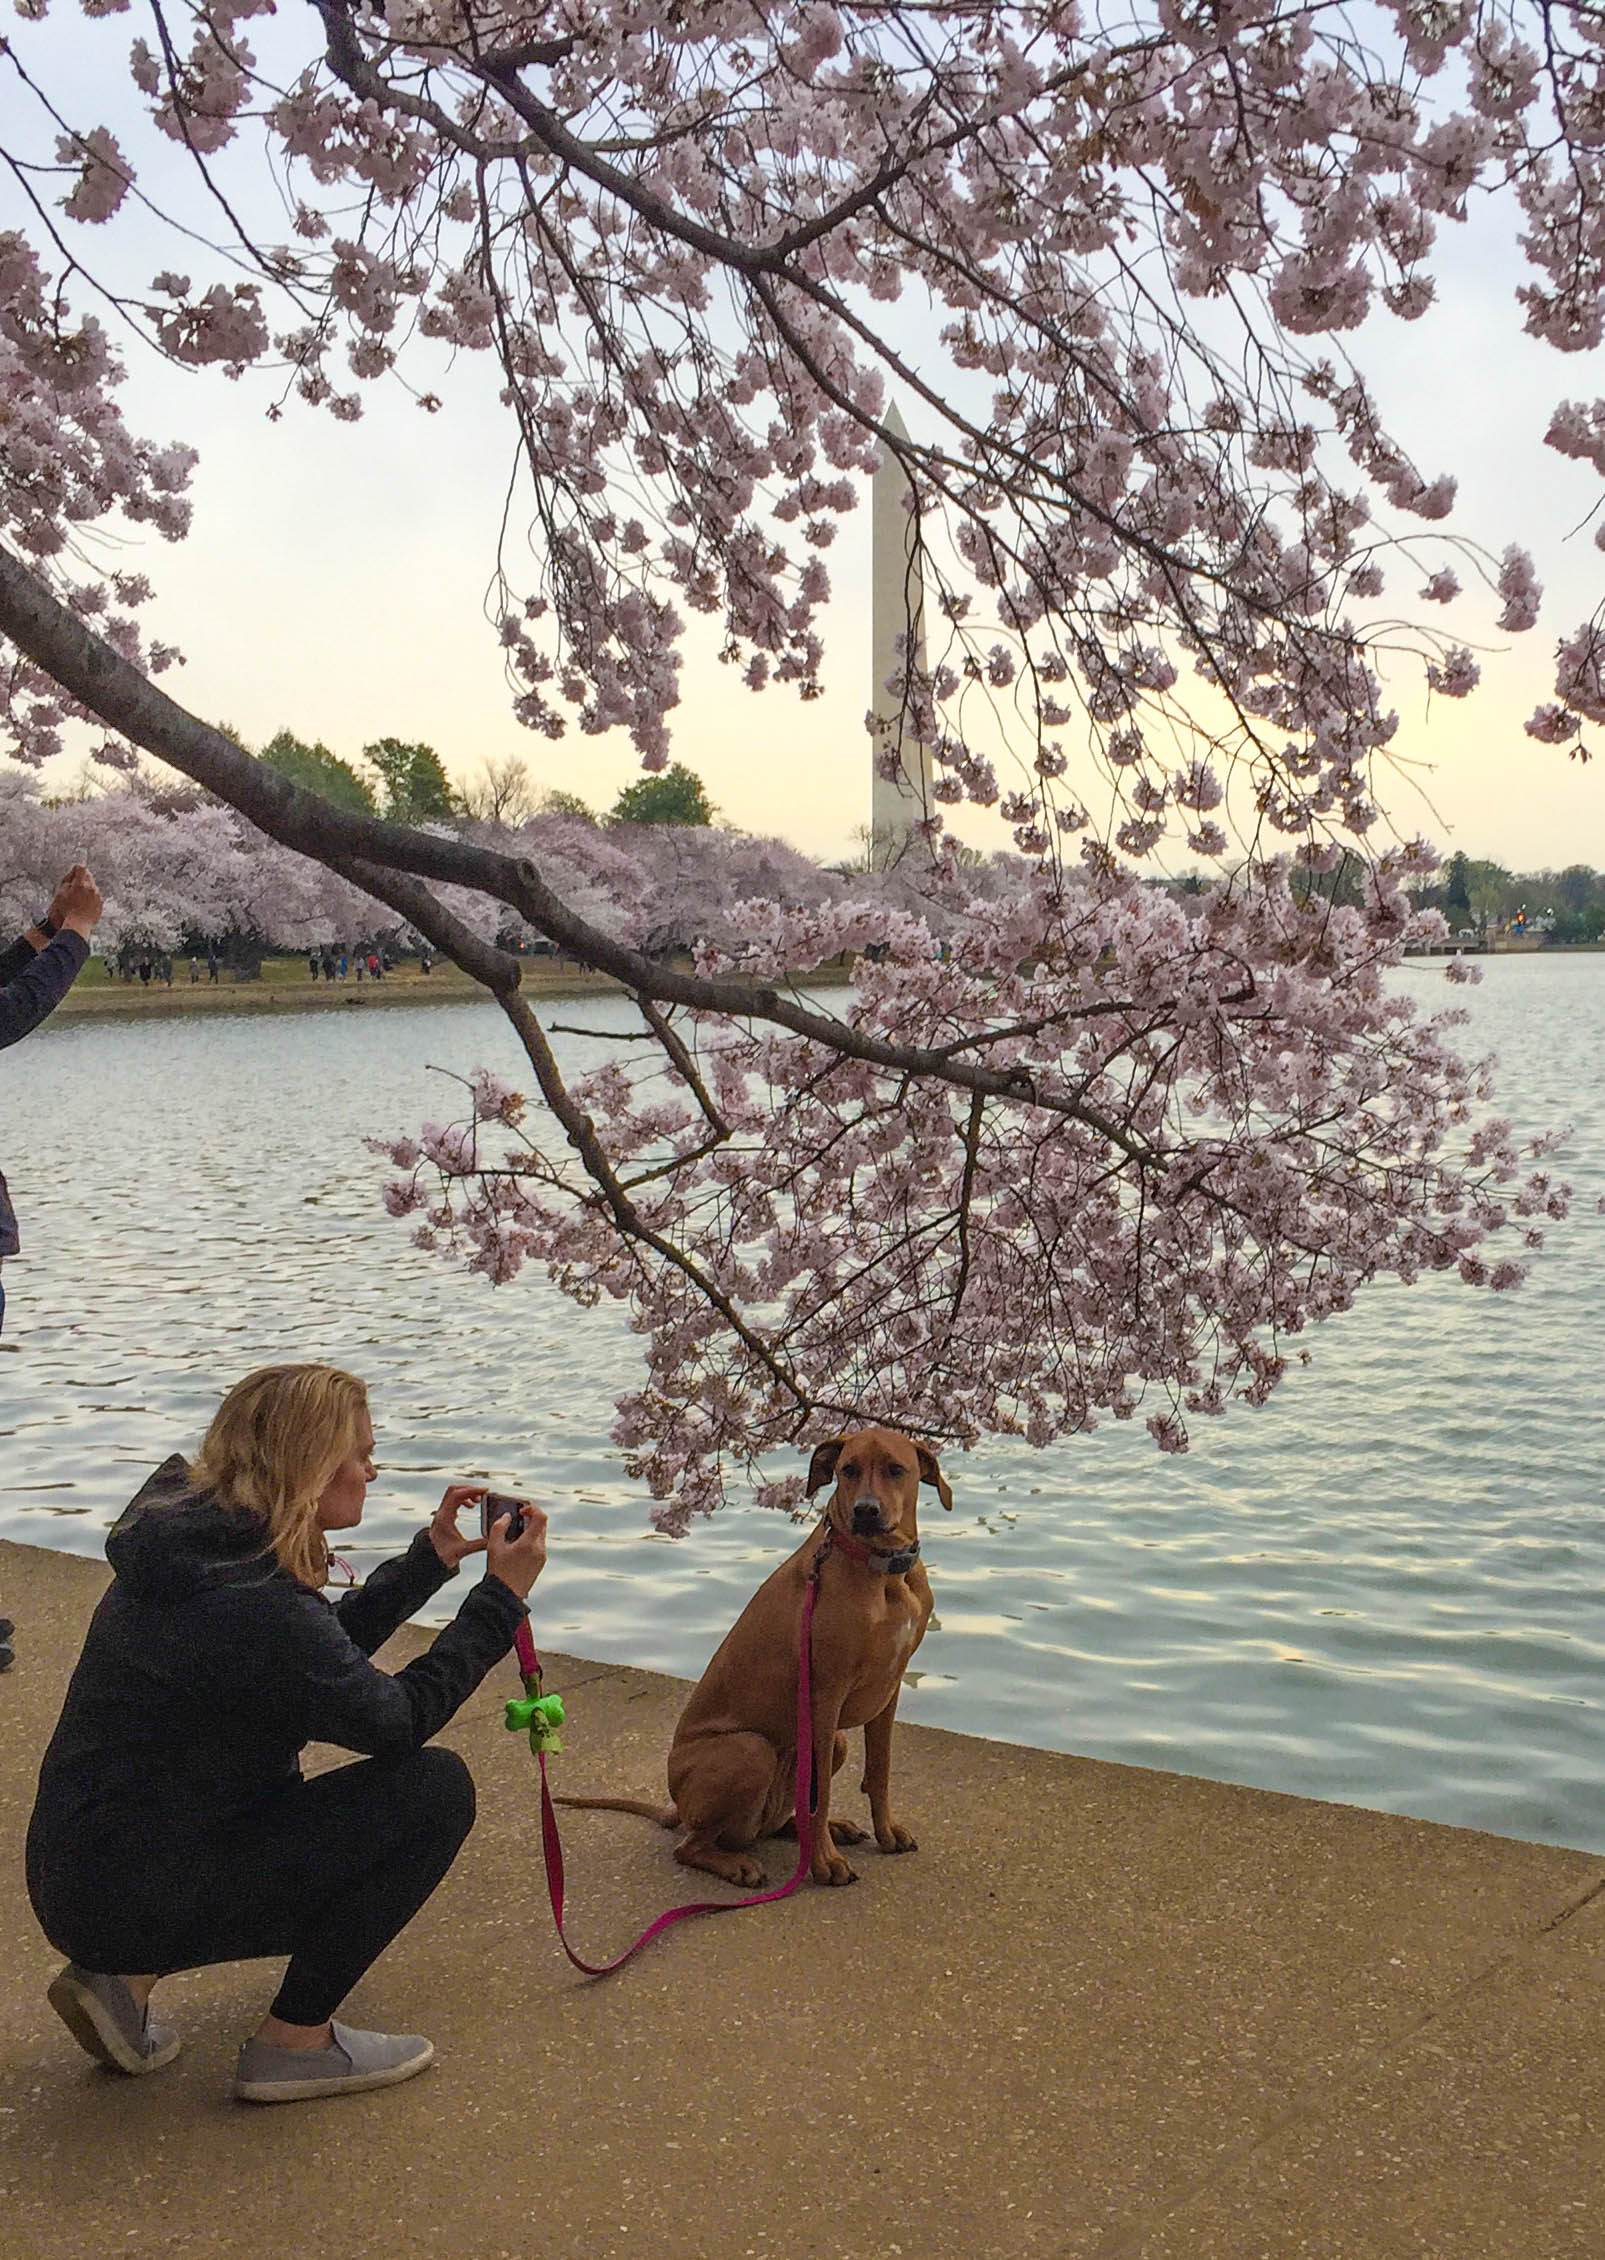 Woman taking a picture of her dog by cherry blossoms next to the Tidal Basin